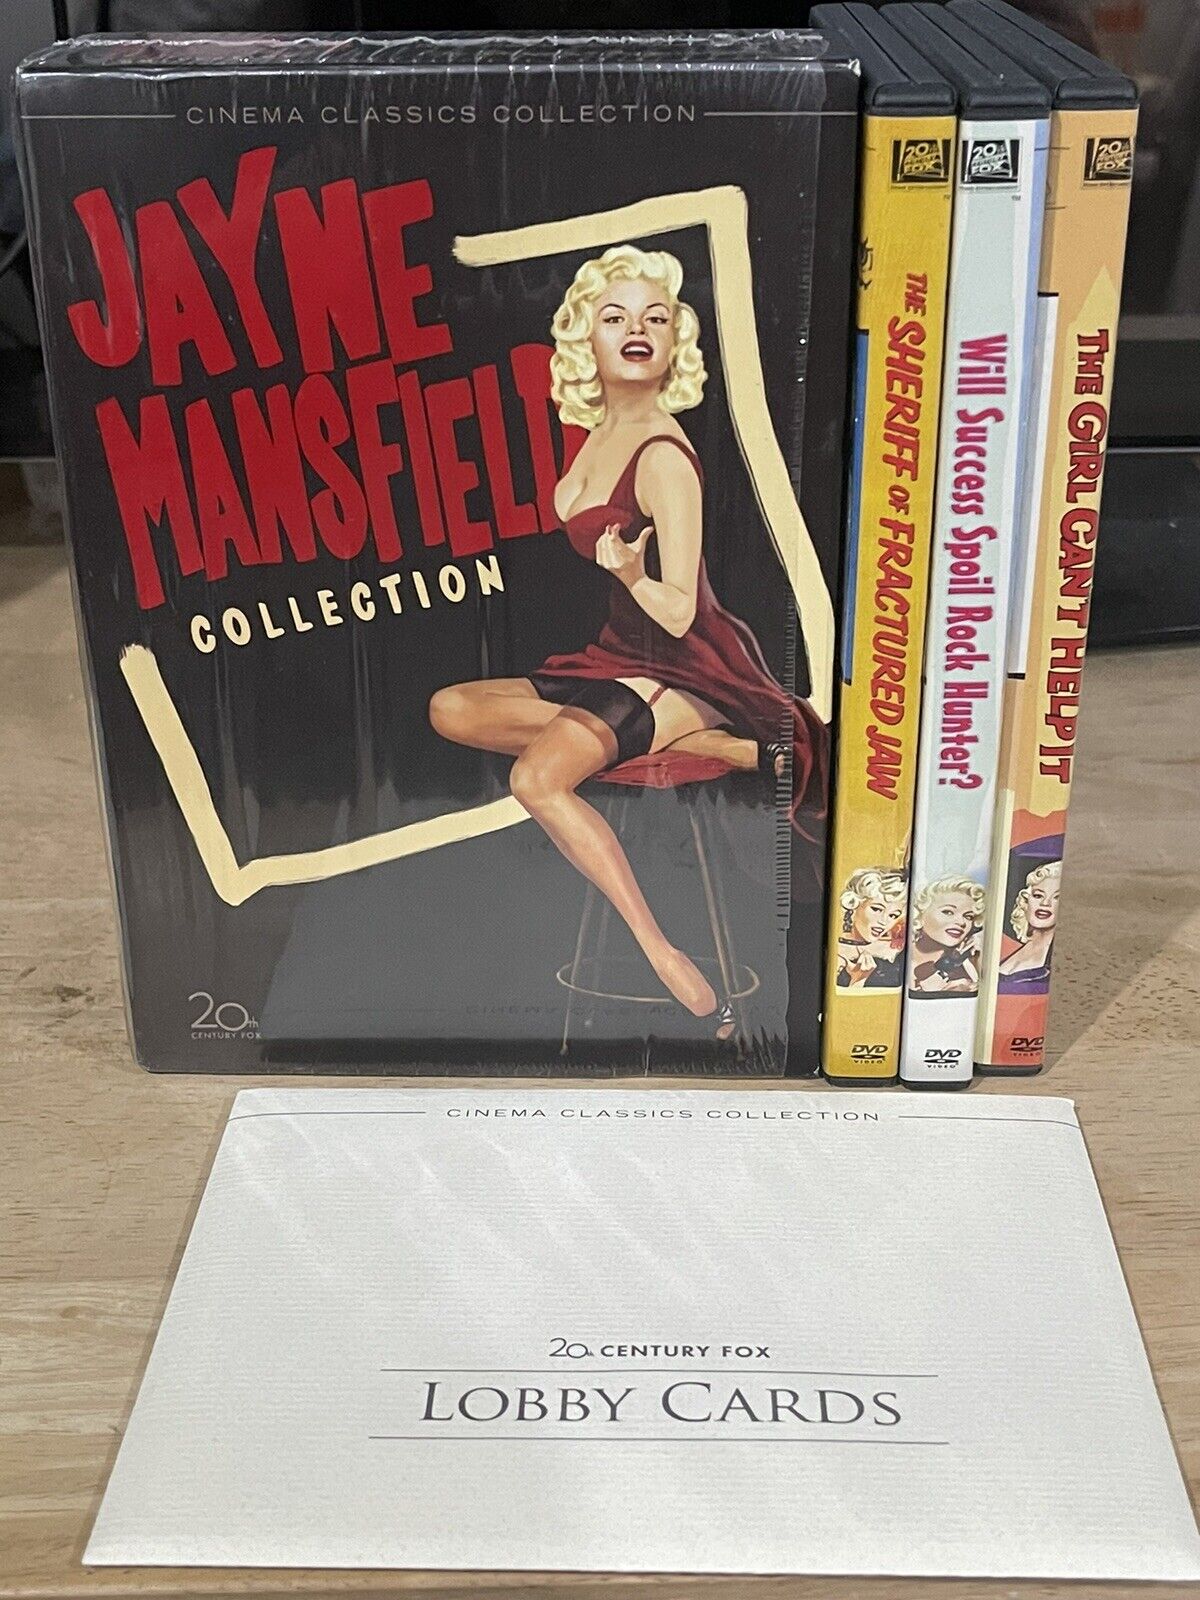 Jayne Mansfield Collection (DVD, 2006, 3-Disc Set) The Girl Can’t Help It+2/EXC